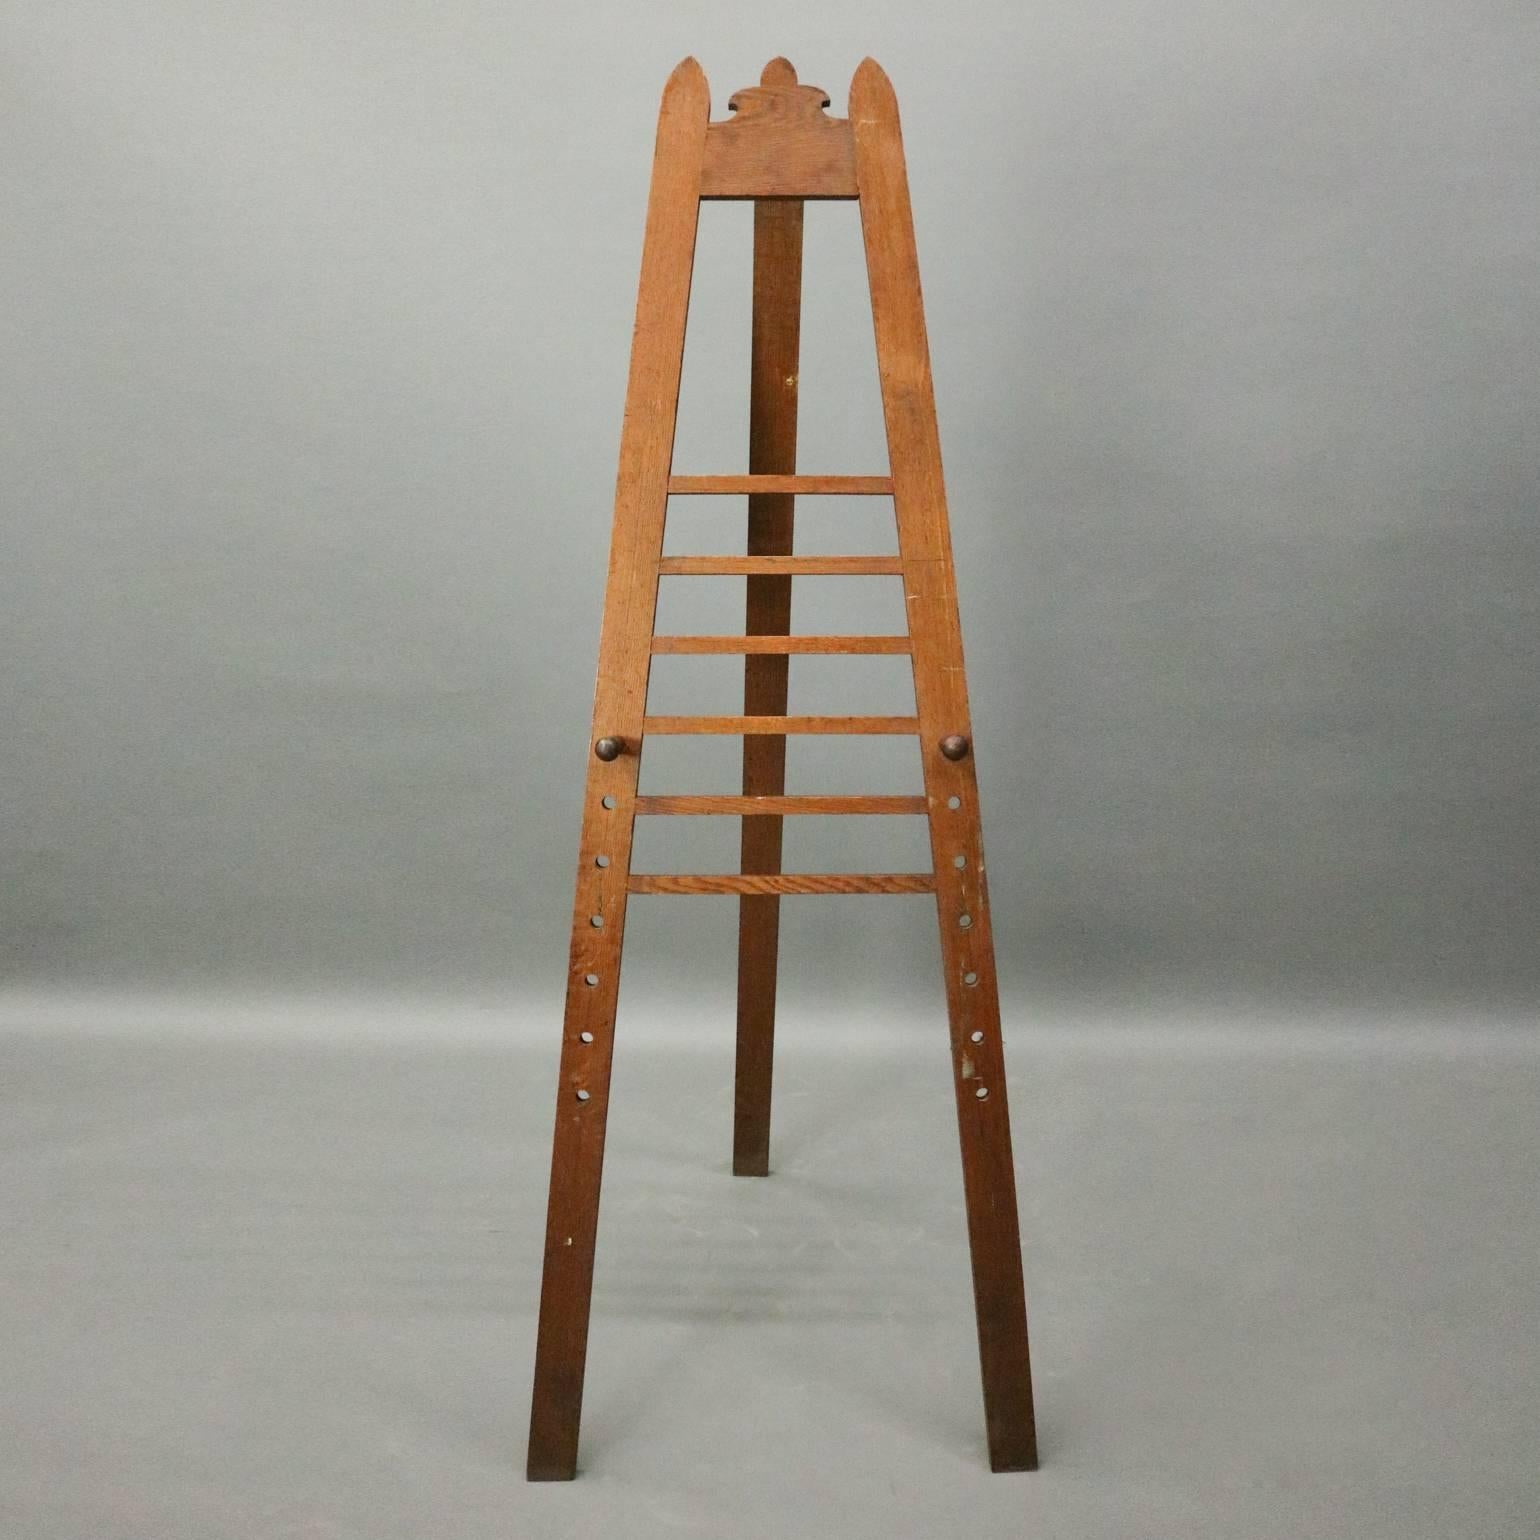 Antique walnut art easel features walnut construction with slat back display and adjustable pegs, circa 1900.